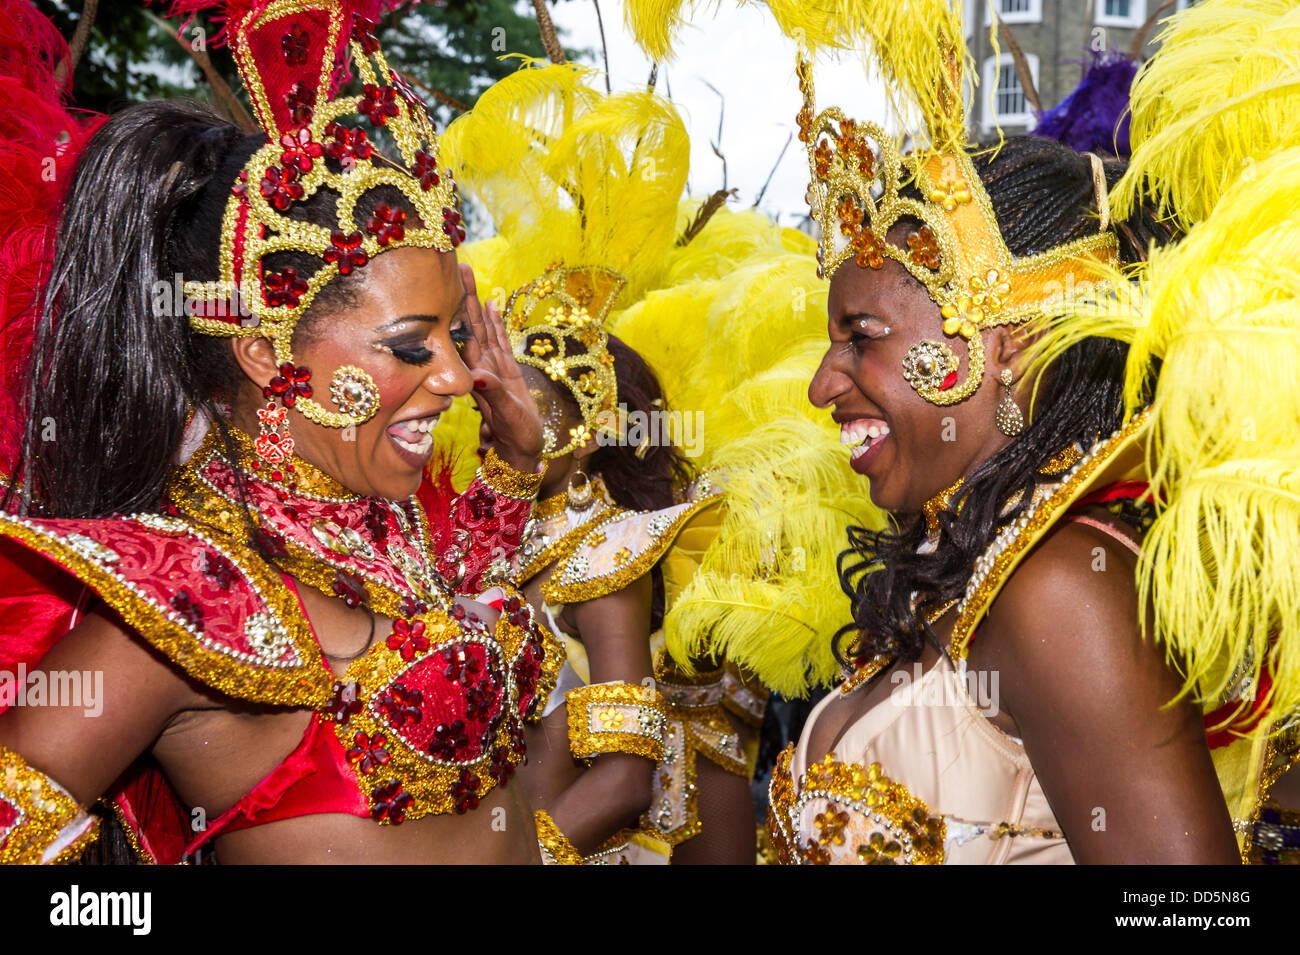 London, UK. 26th Aug, 2013. Paraiso school of Samba perform at the Notting Hill Carnival, London, UK,  26 August 2013. Credit:  Guy Bell/Alamy Live News Stock Photo